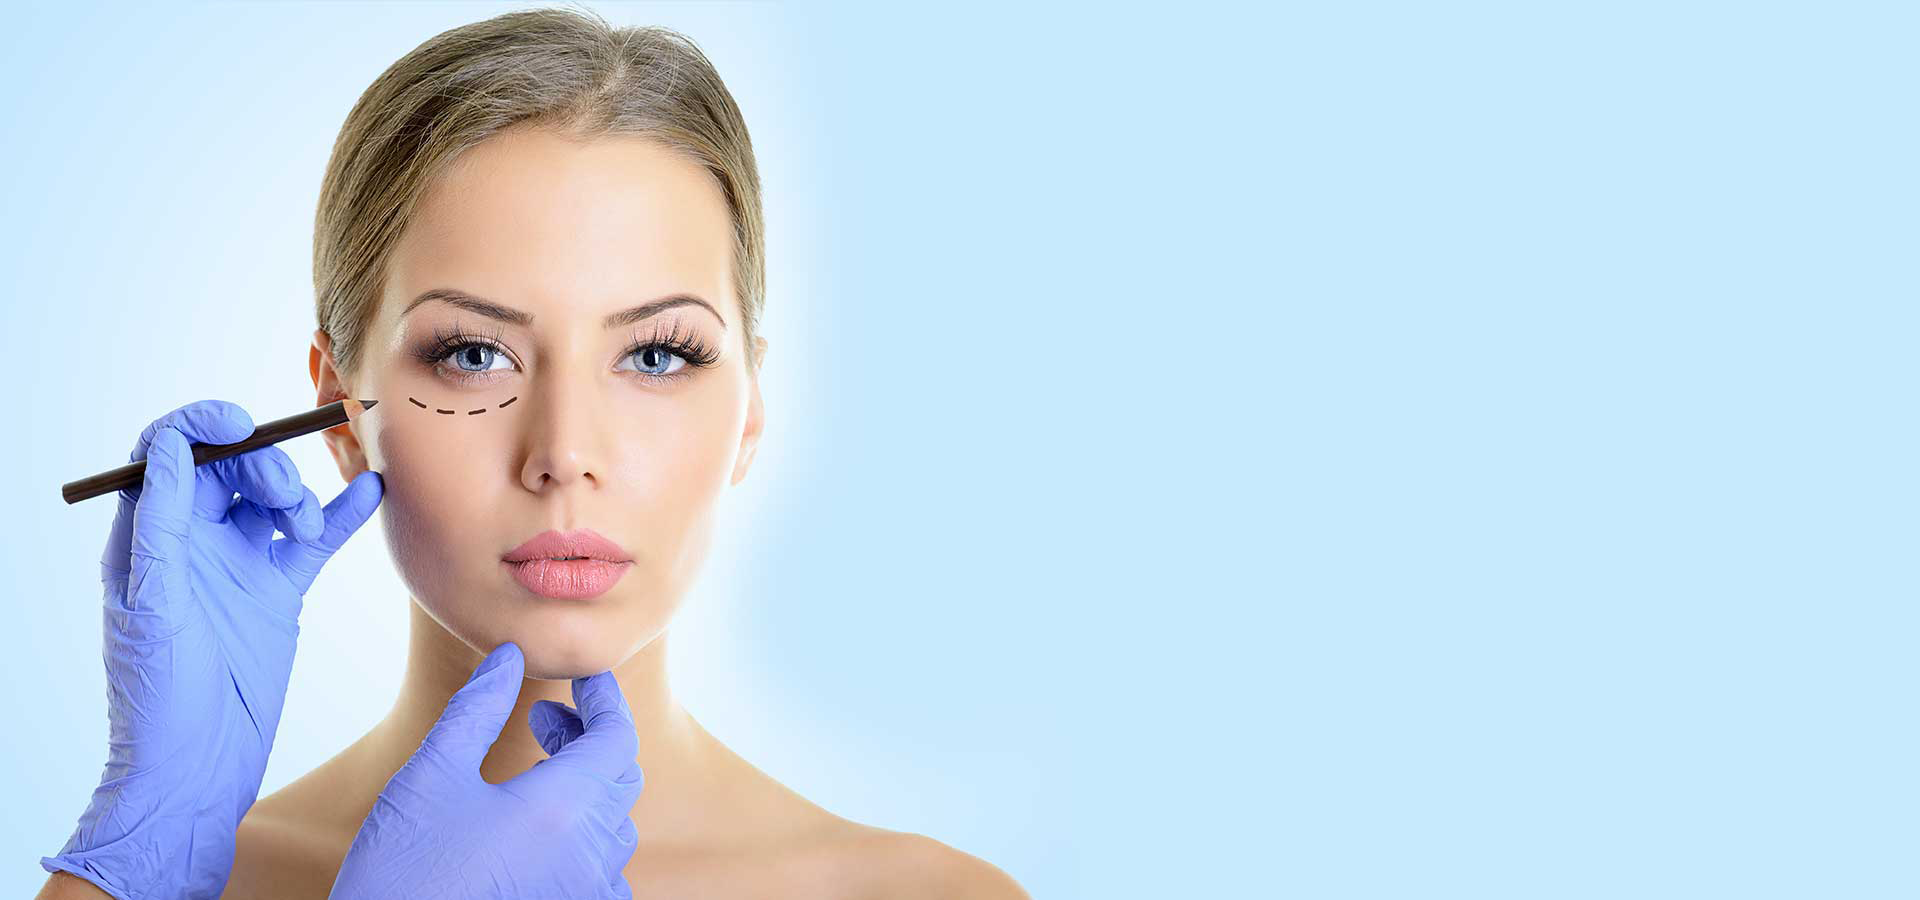 Top Tips to be Considered while Choosing Cosmetic Surgery?